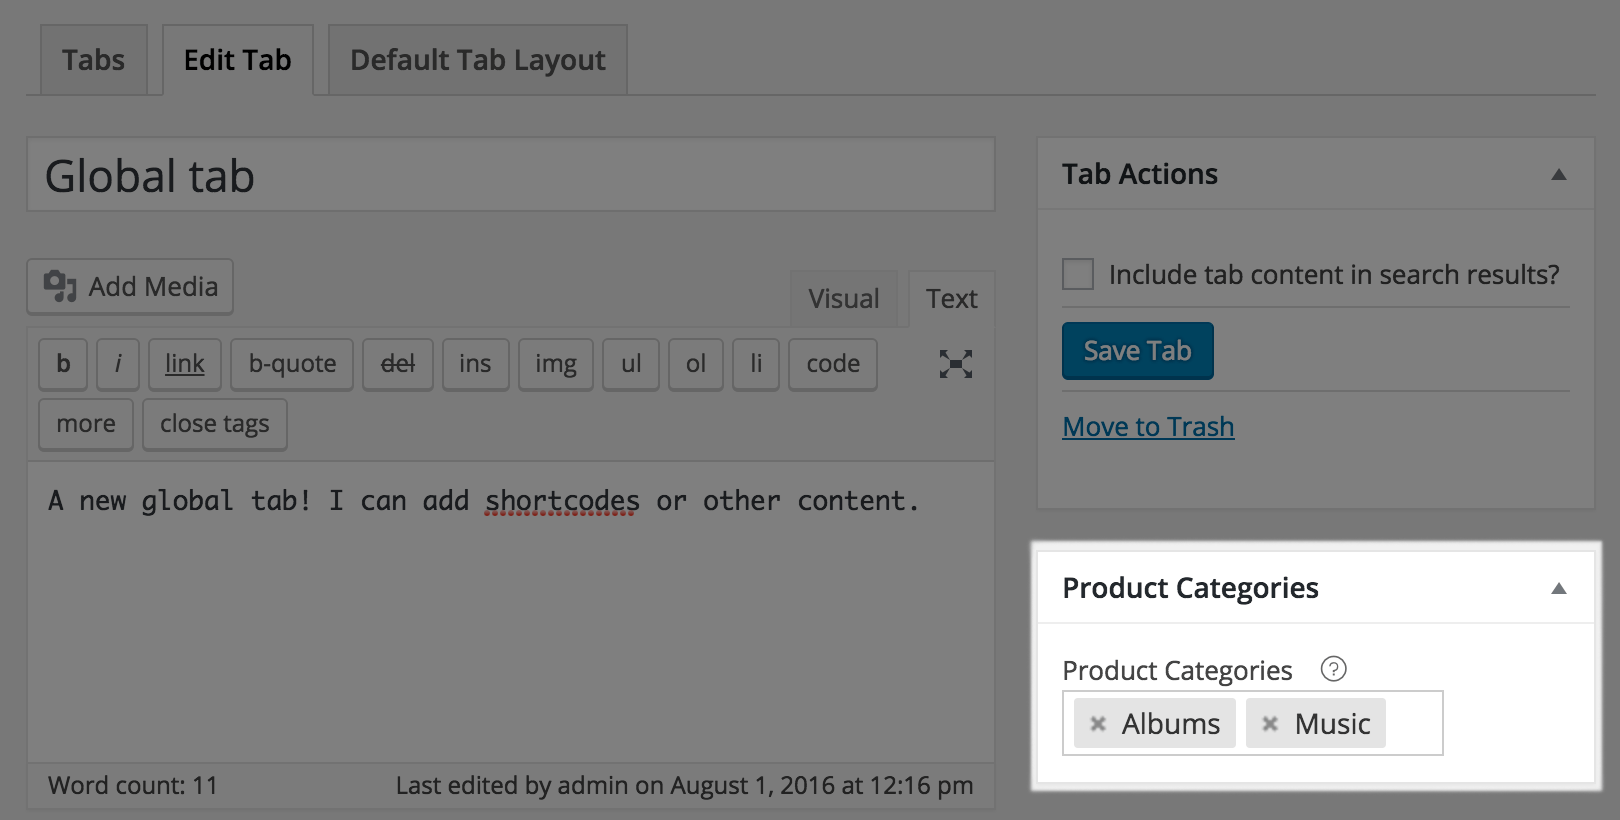 WooCommerce Tab Manager: Global tab categories